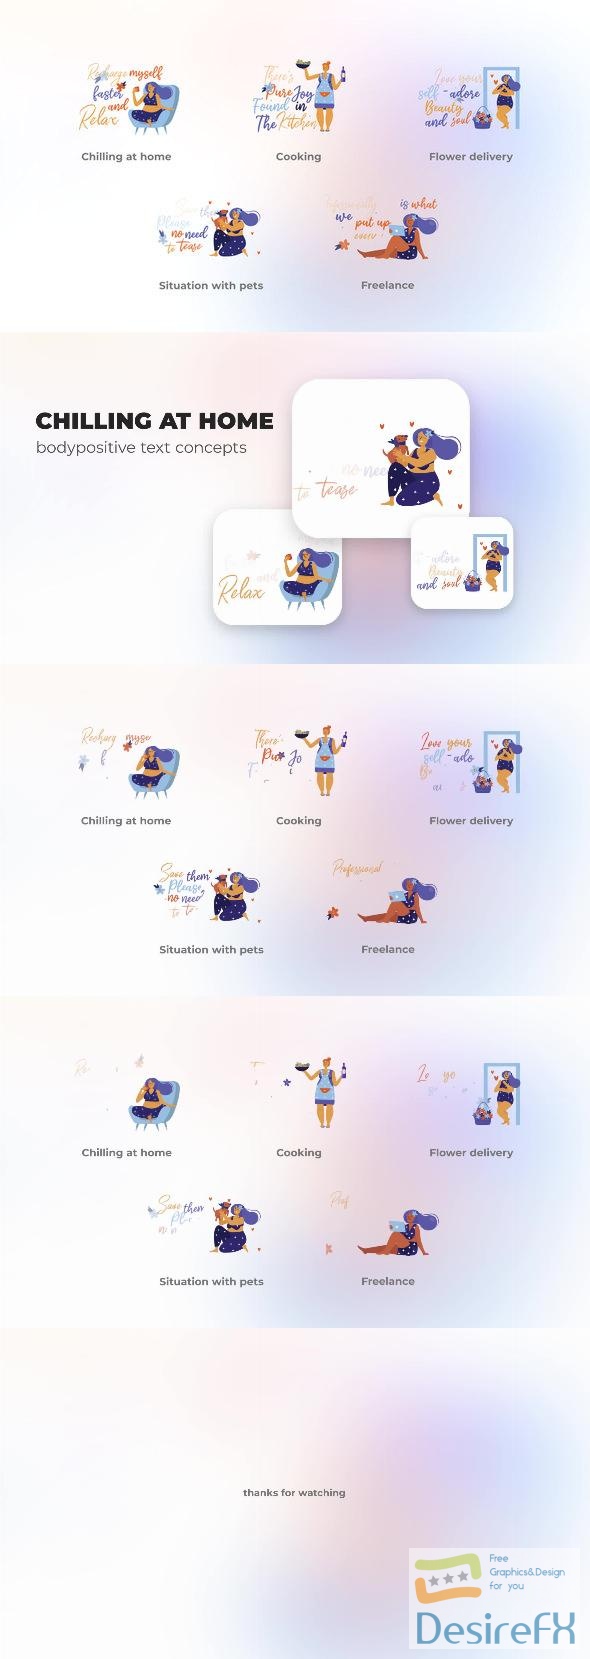 VideoHive Chilling at Home - Bodypositive Text Concepts 45848152